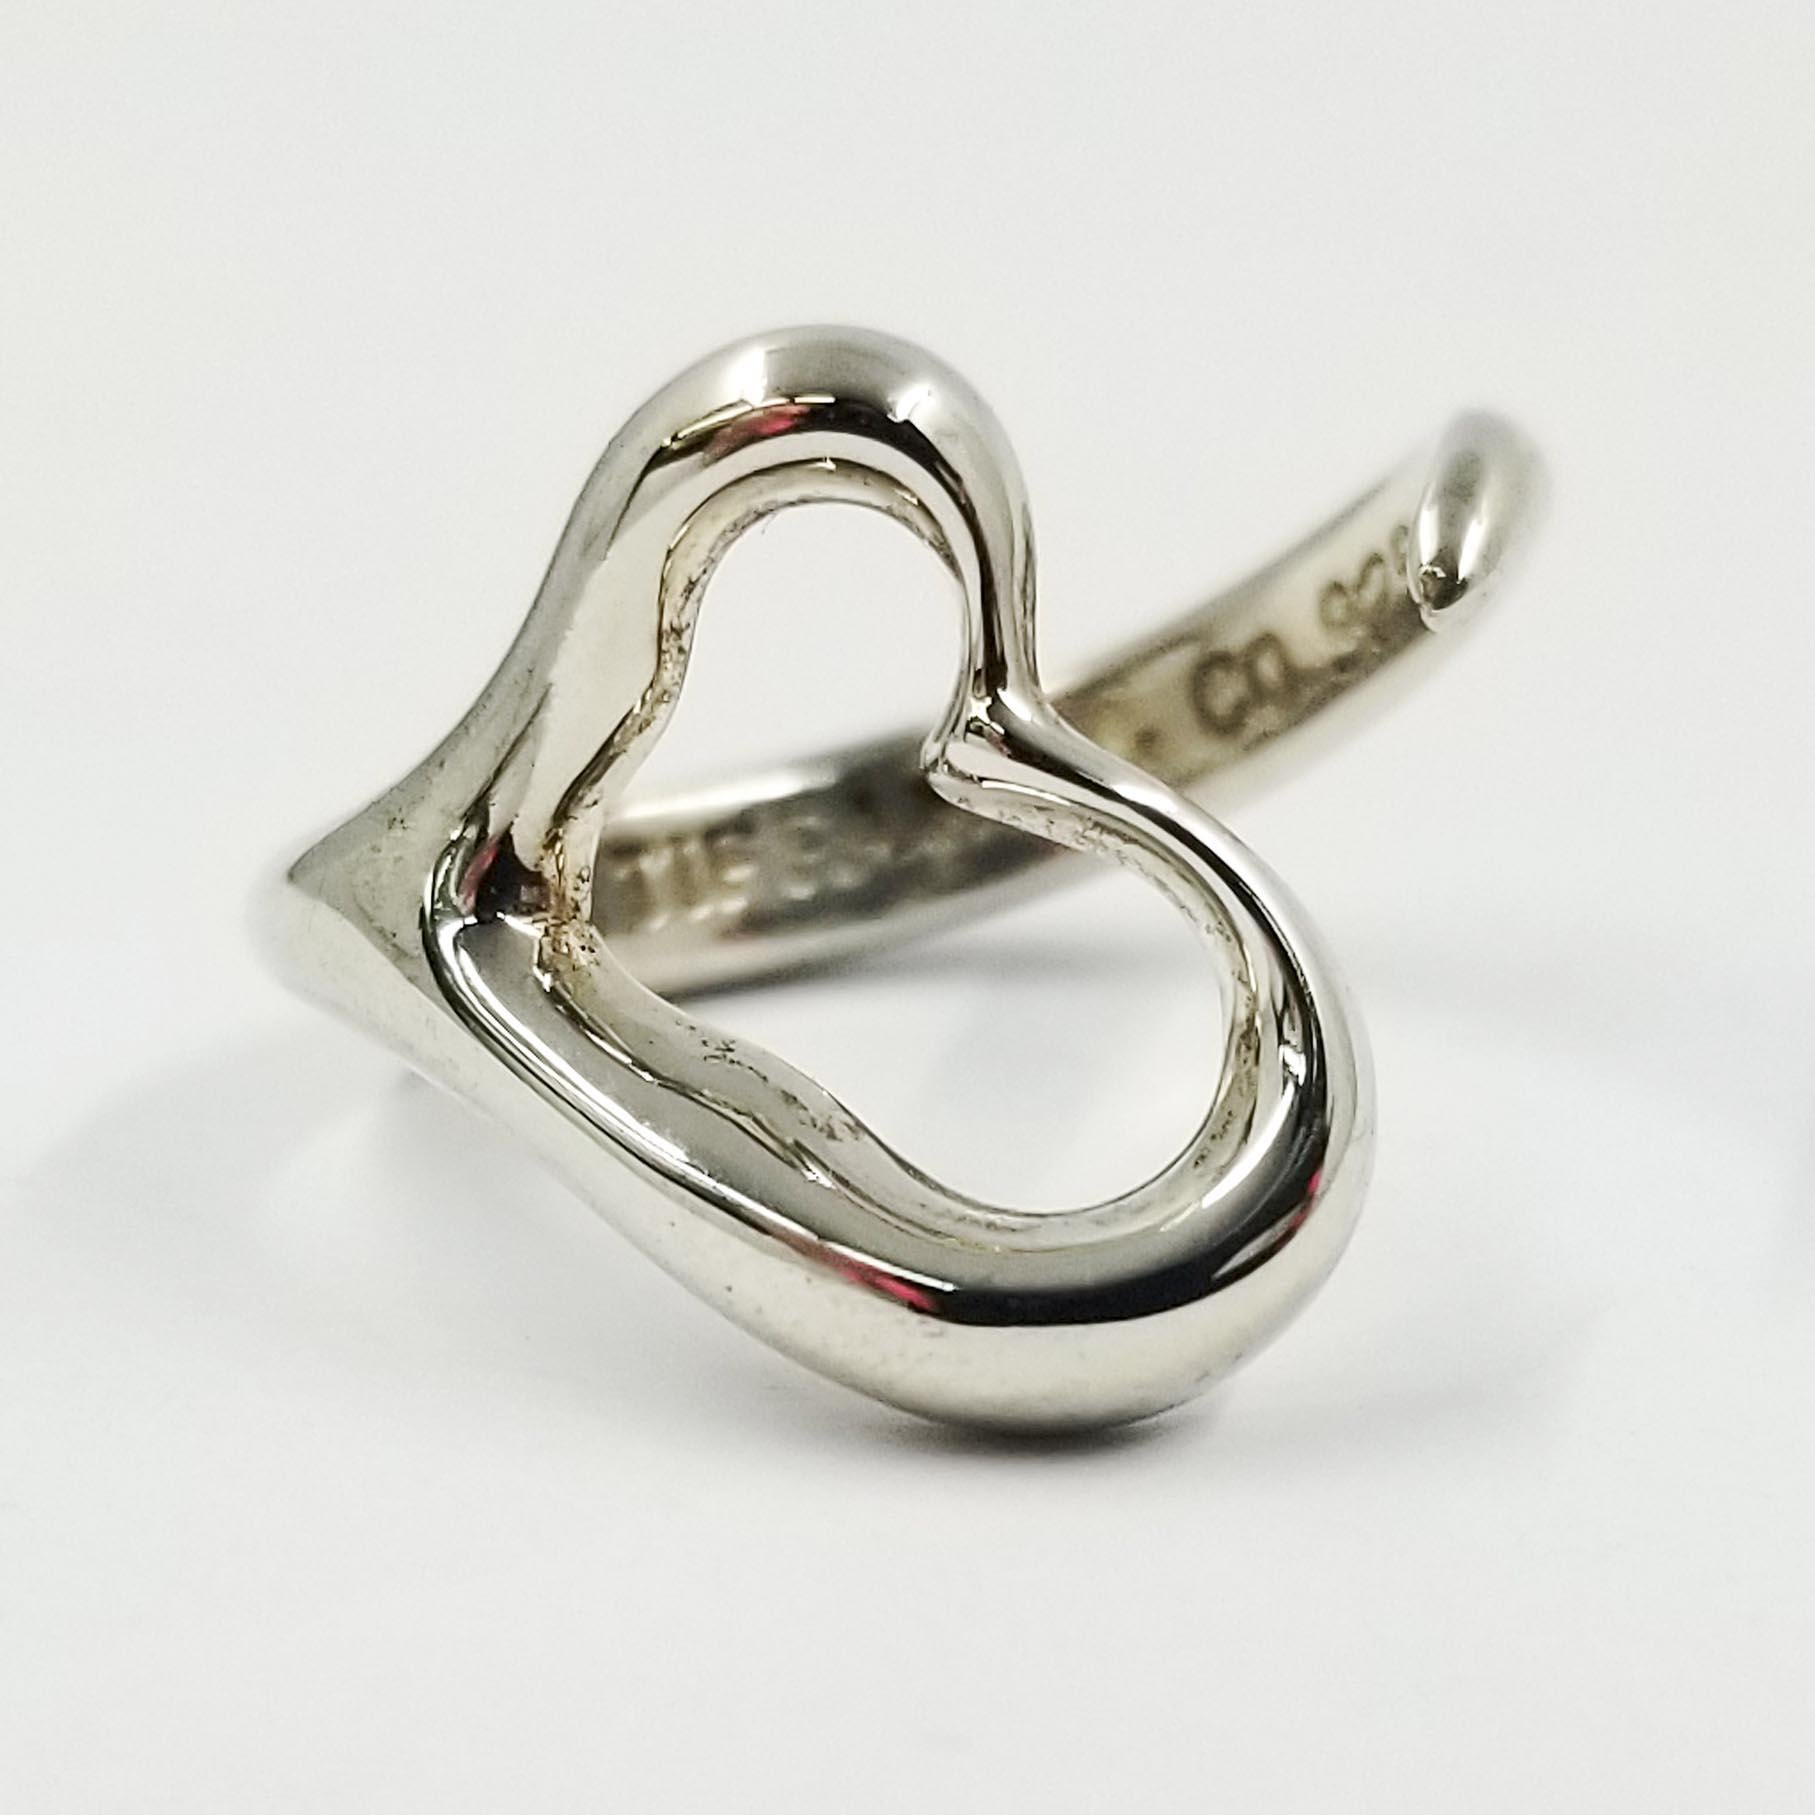 This simple sterling silver ring is designed by Elsa Peretti for Tiffany & Co. Its whimsical design features a heart with wrap around open shank. The inside is engraved with Elsa Peretti's signature, TIFFANY & CO., & 925. Currently finger size 6;